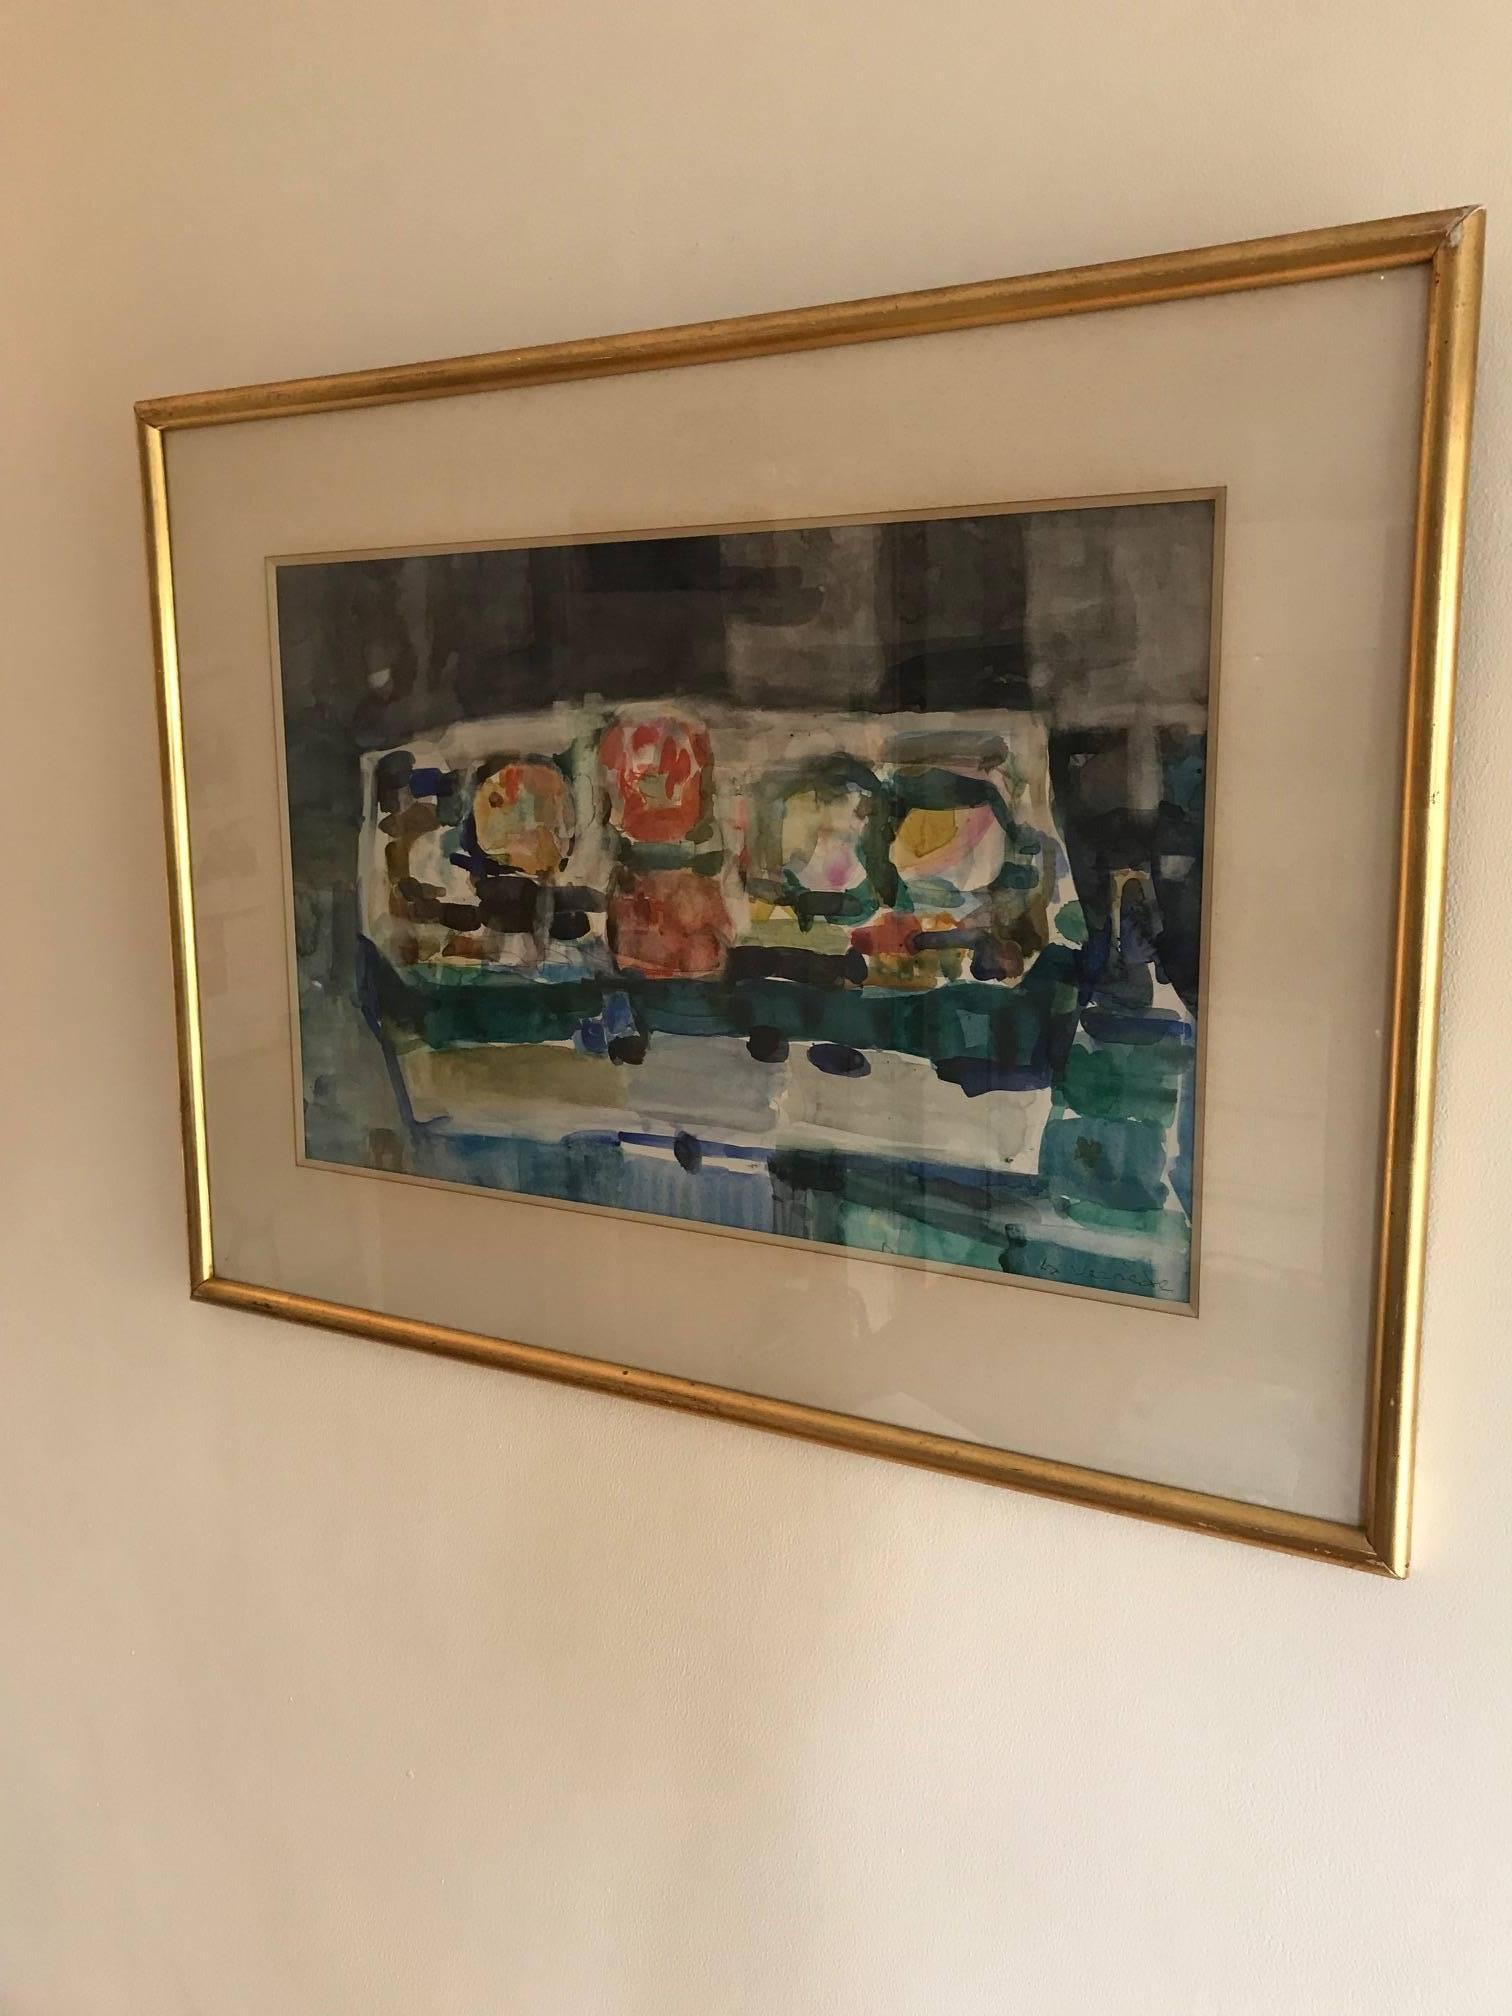 A vibrant, colouful gouache picture of a still life by the French 20th century artist Andre La Vernede, 1899-1971.  An artist from Montpelier, who painted all his life and who moved to Paris in 1939. He exhibited a group of his works at the Salon